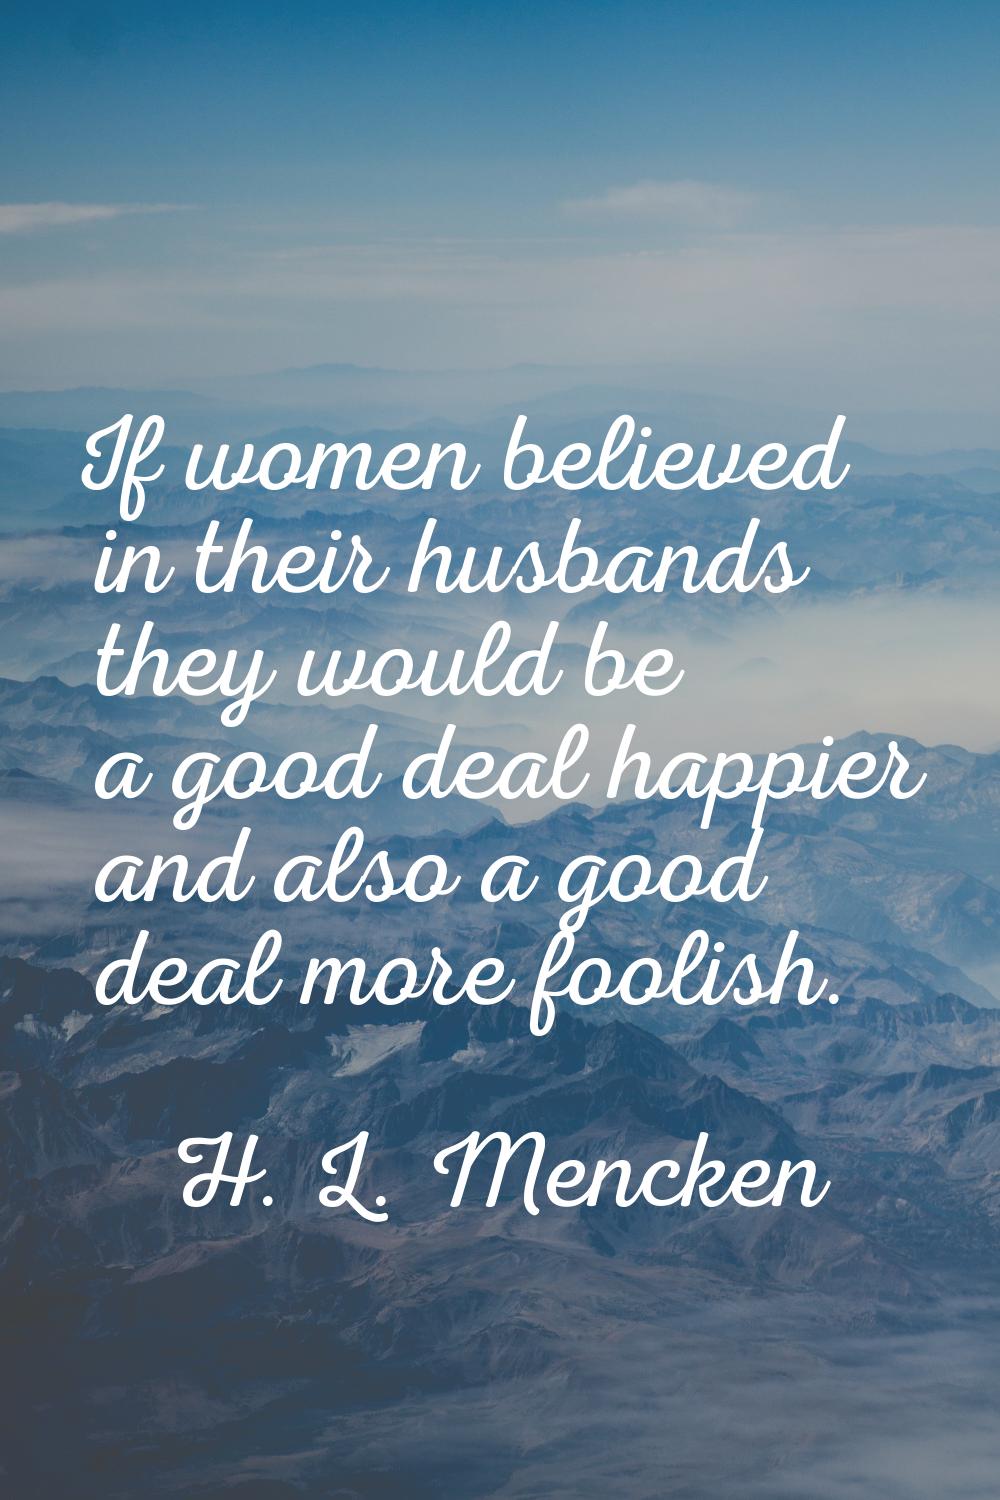 If women believed in their husbands they would be a good deal happier and also a good deal more foo